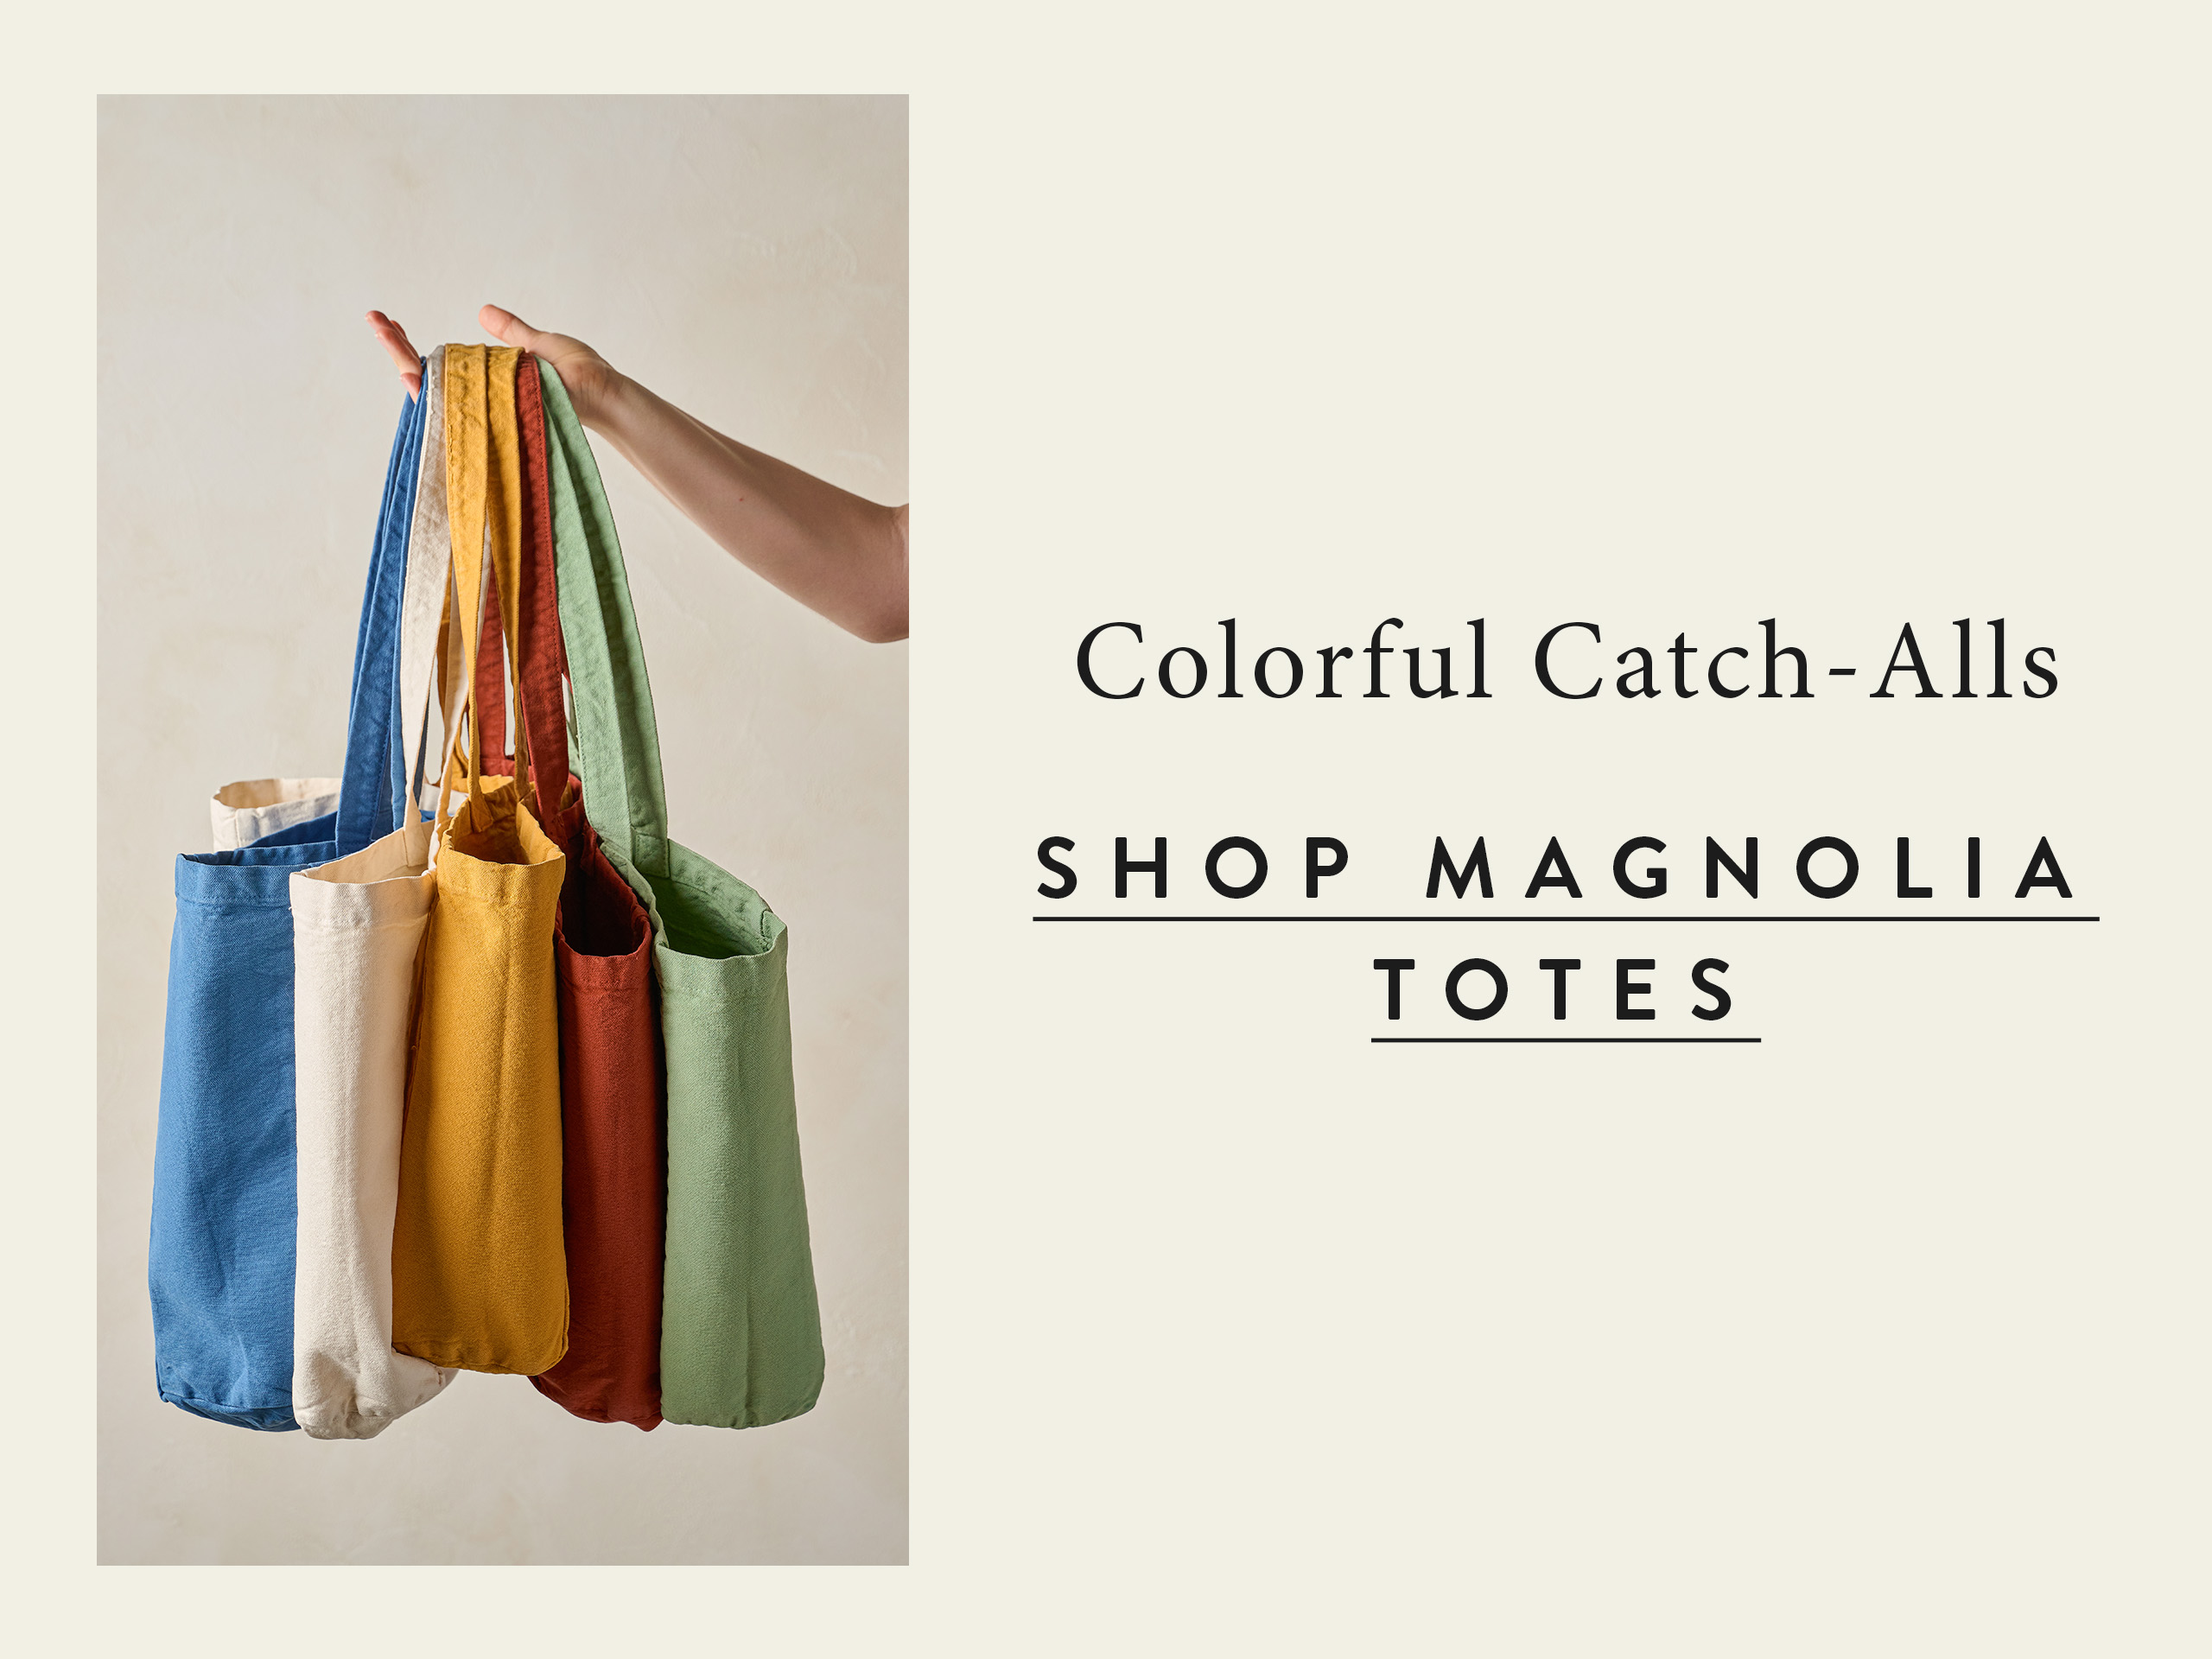 colorful catch-alls - shop magnolia totes. a hand holds various colors of tote bags